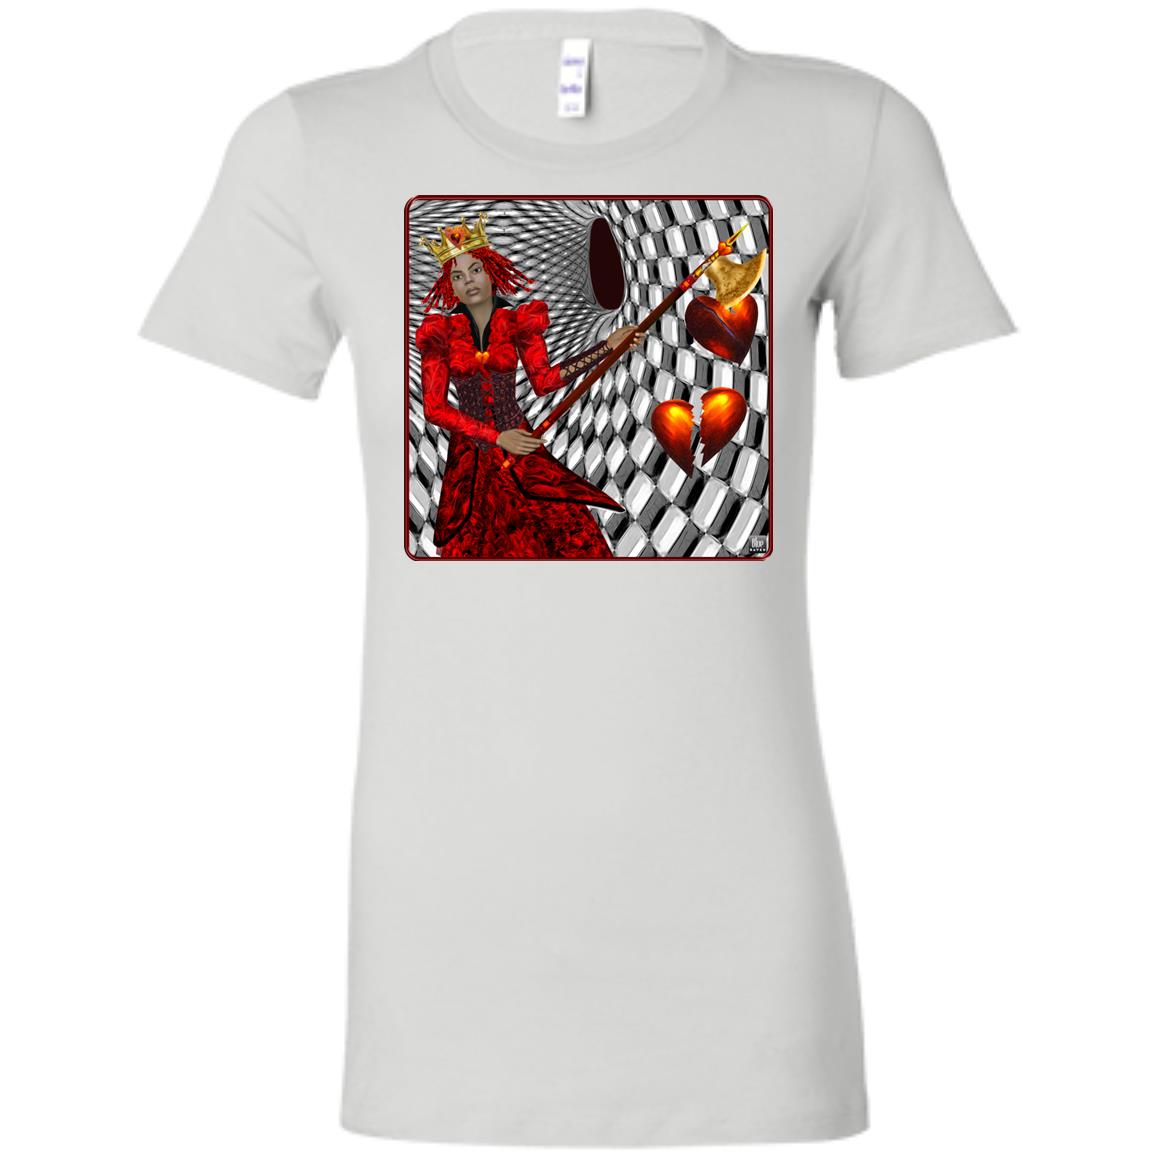 portrait of the queen of hearts - Women's Fitted T-Shirt